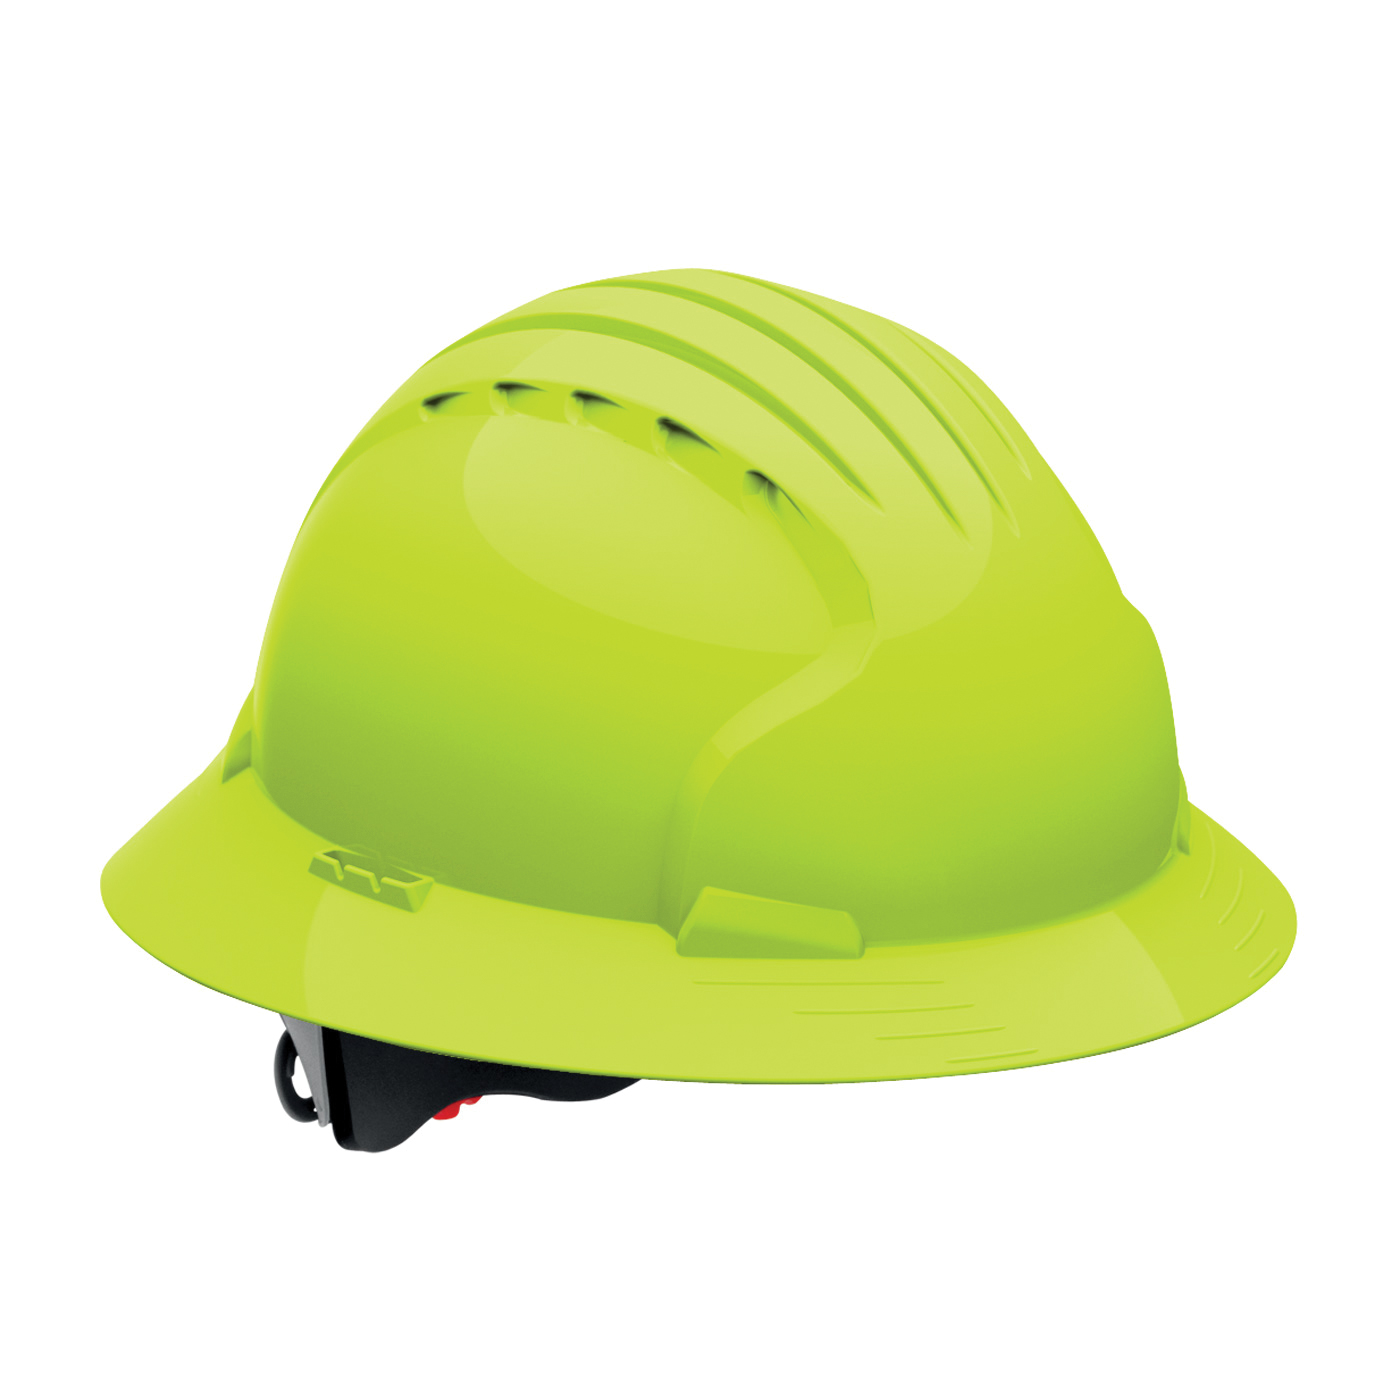 JSP® 280-EV6161V-10 Evolution® Deluxe 6151 Full Brim Vented Hard Hat, SZ 6-5/8 Fits Mini Hat, SZ 8 Fits Max Hat, ABS, 6-Point Suspension, ANSI Electrical Class Rating: Class E, ANSI Impact Rating: Type I, Ratchet Adjustment